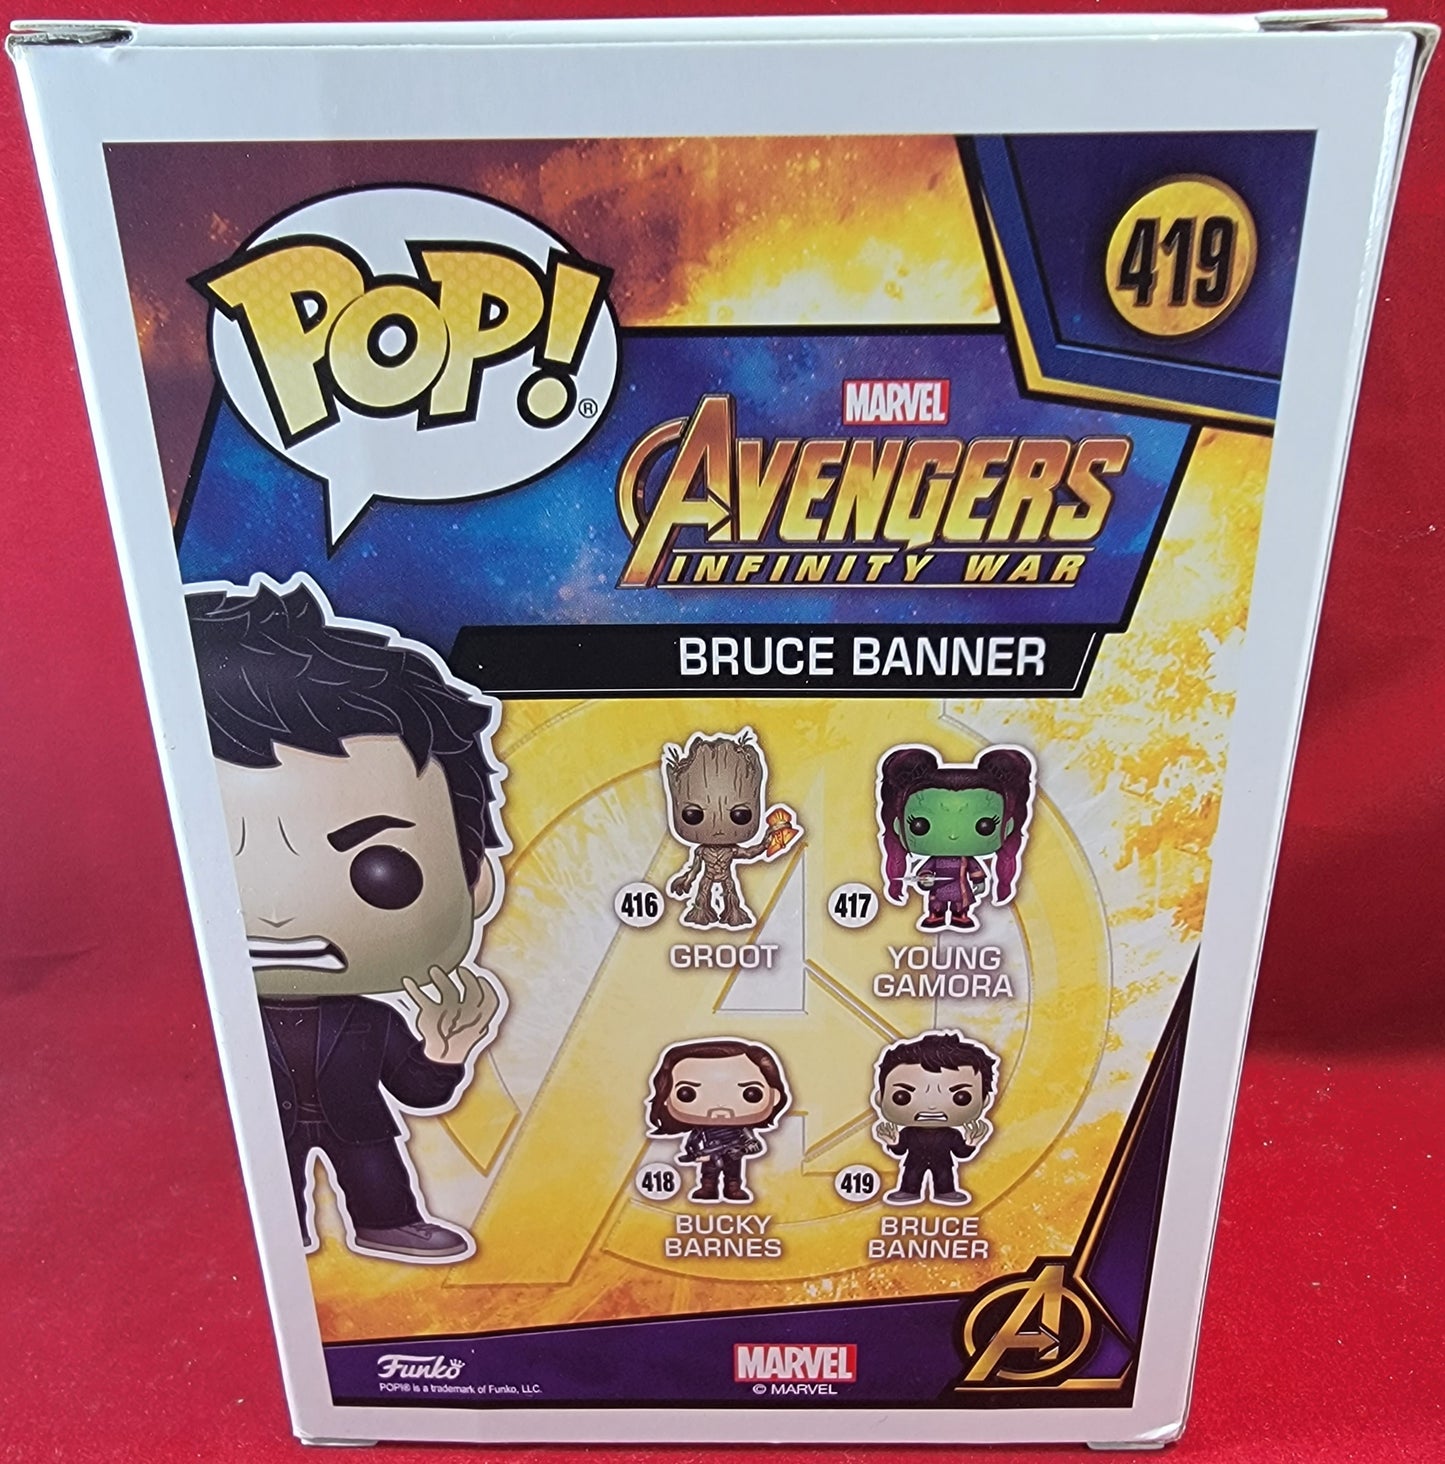 Bruce banner funko # 419 (nib)
brand new 2018 avengers infinity war Bruce banner (mark ruffalo) funko pop. pop has Bruce starting to turn into the hulk. pop has banner with lite scratches on the plastic and will be shipped in a compatible pop protector.